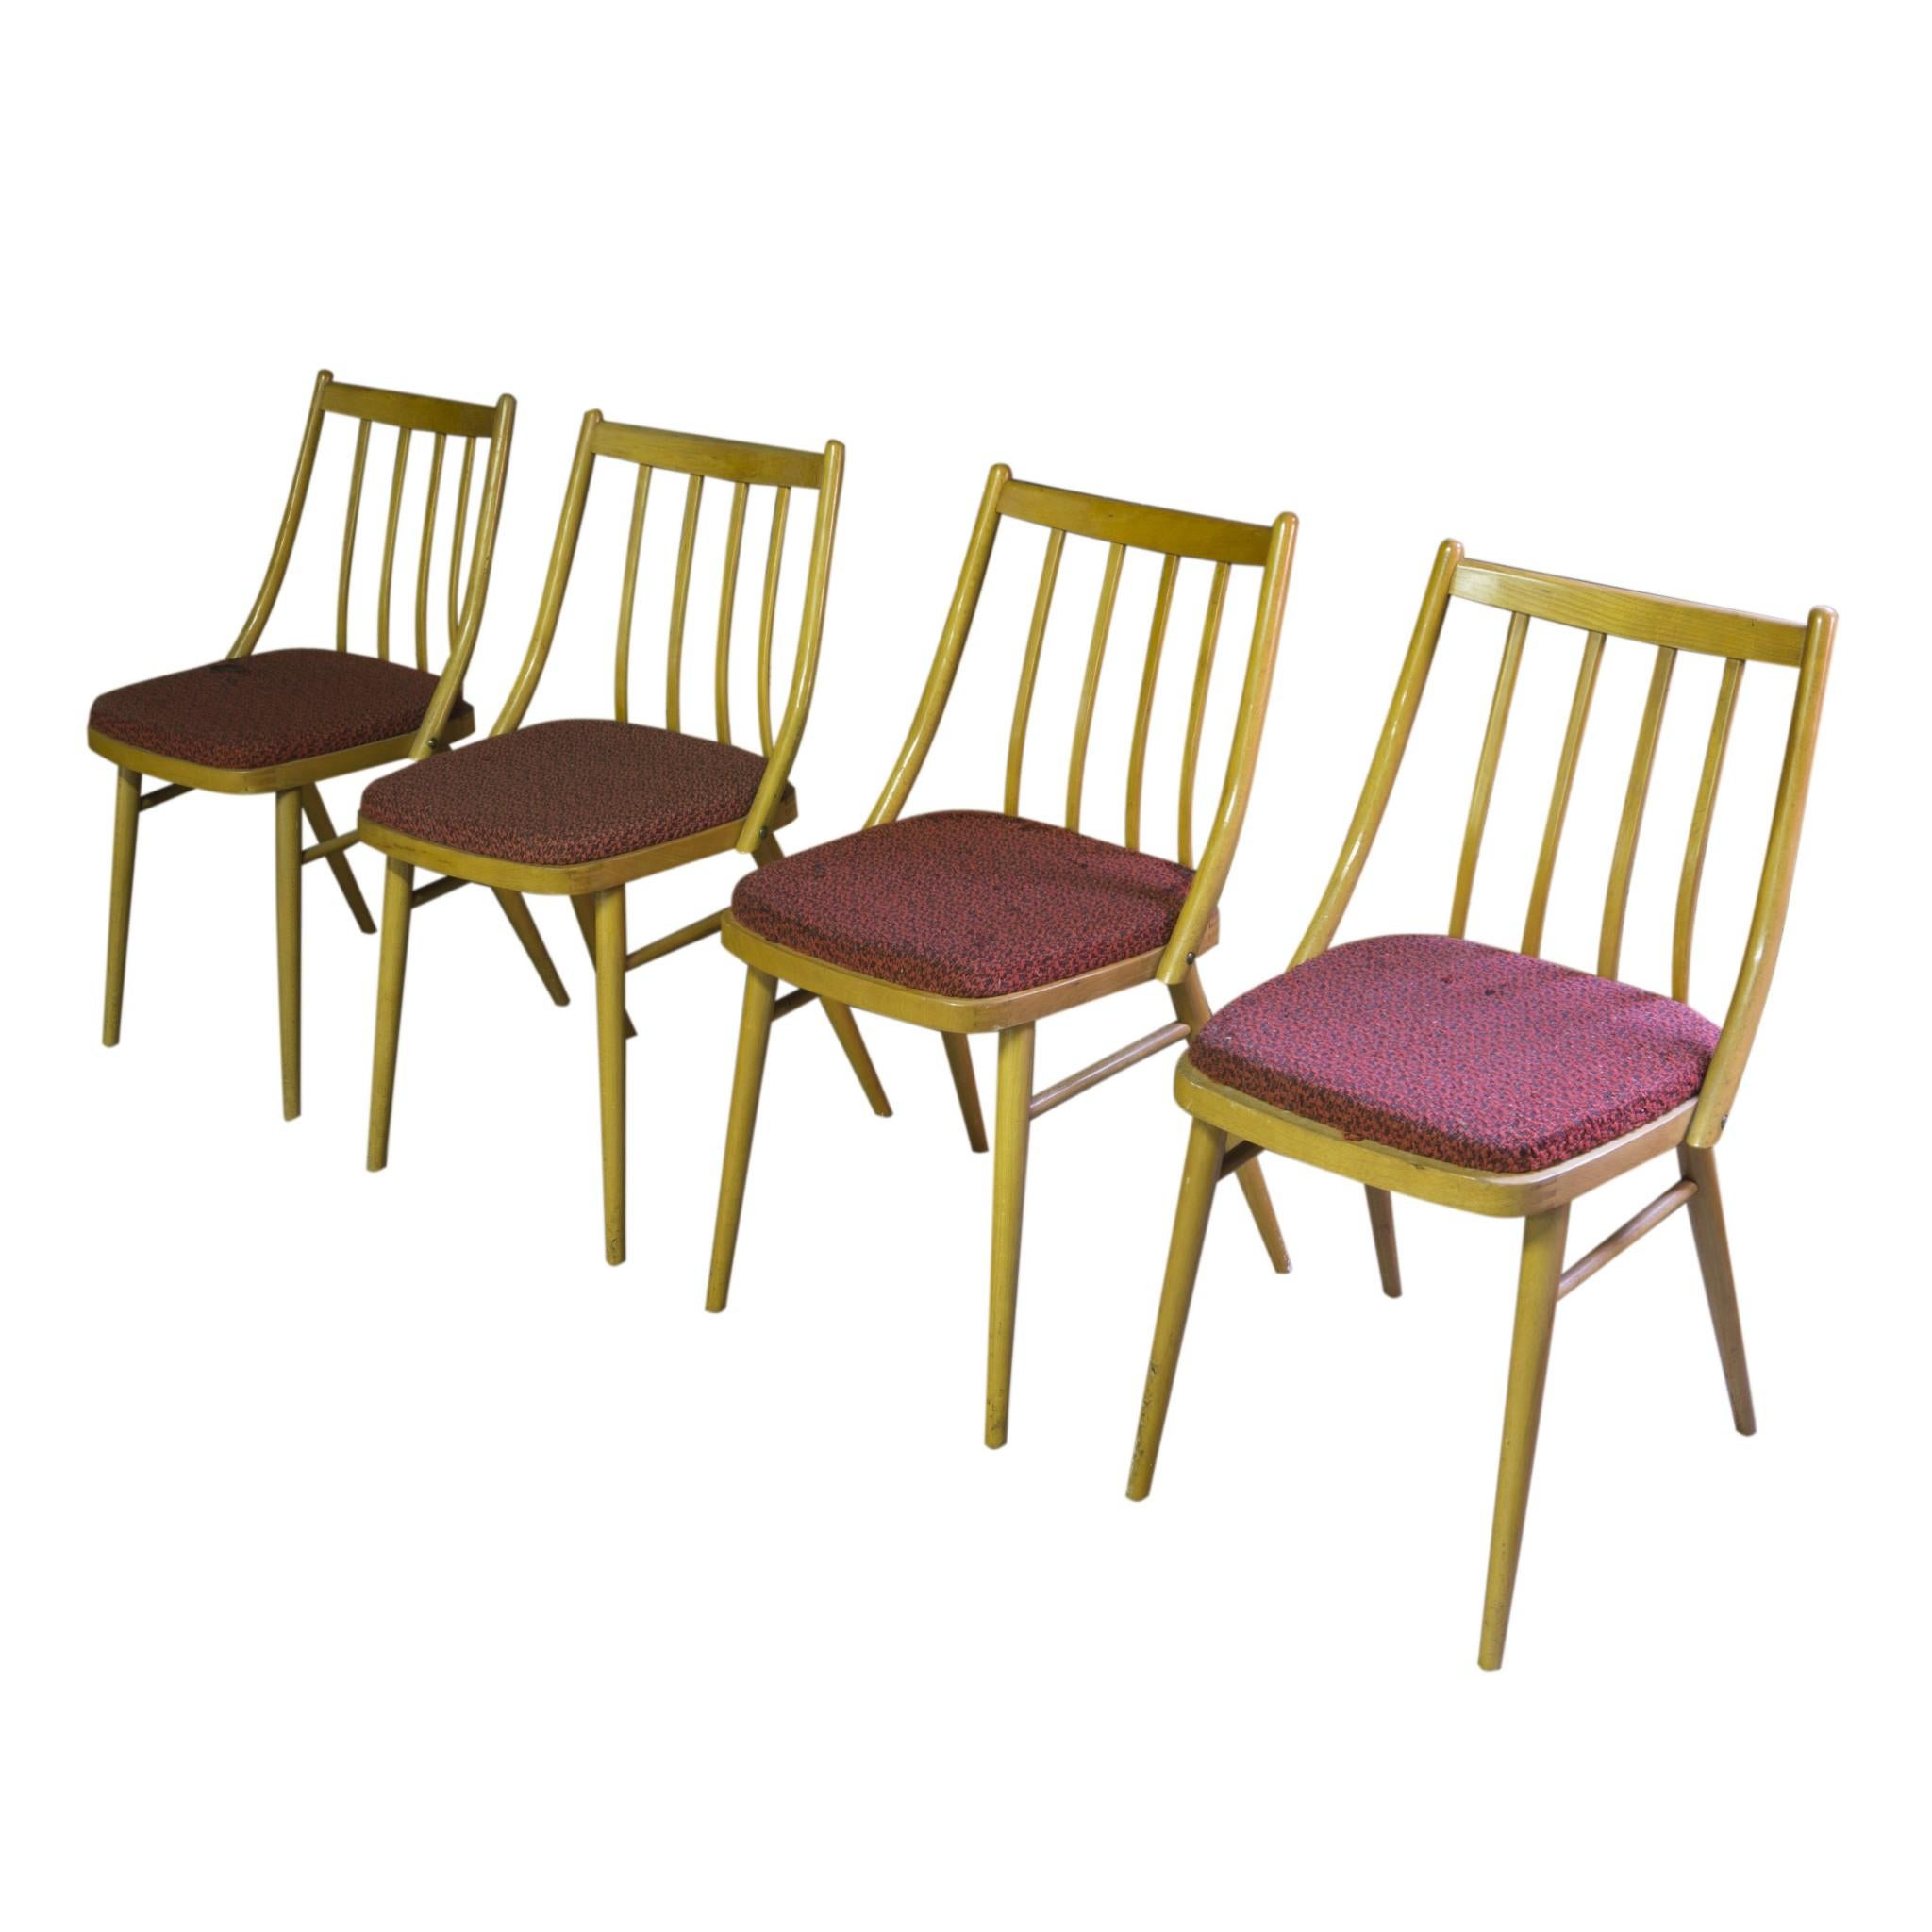 Mid-Century Modern Set of Four Vintage Dining Chairs, TON, 1960s, Czechoslovakia For Sale